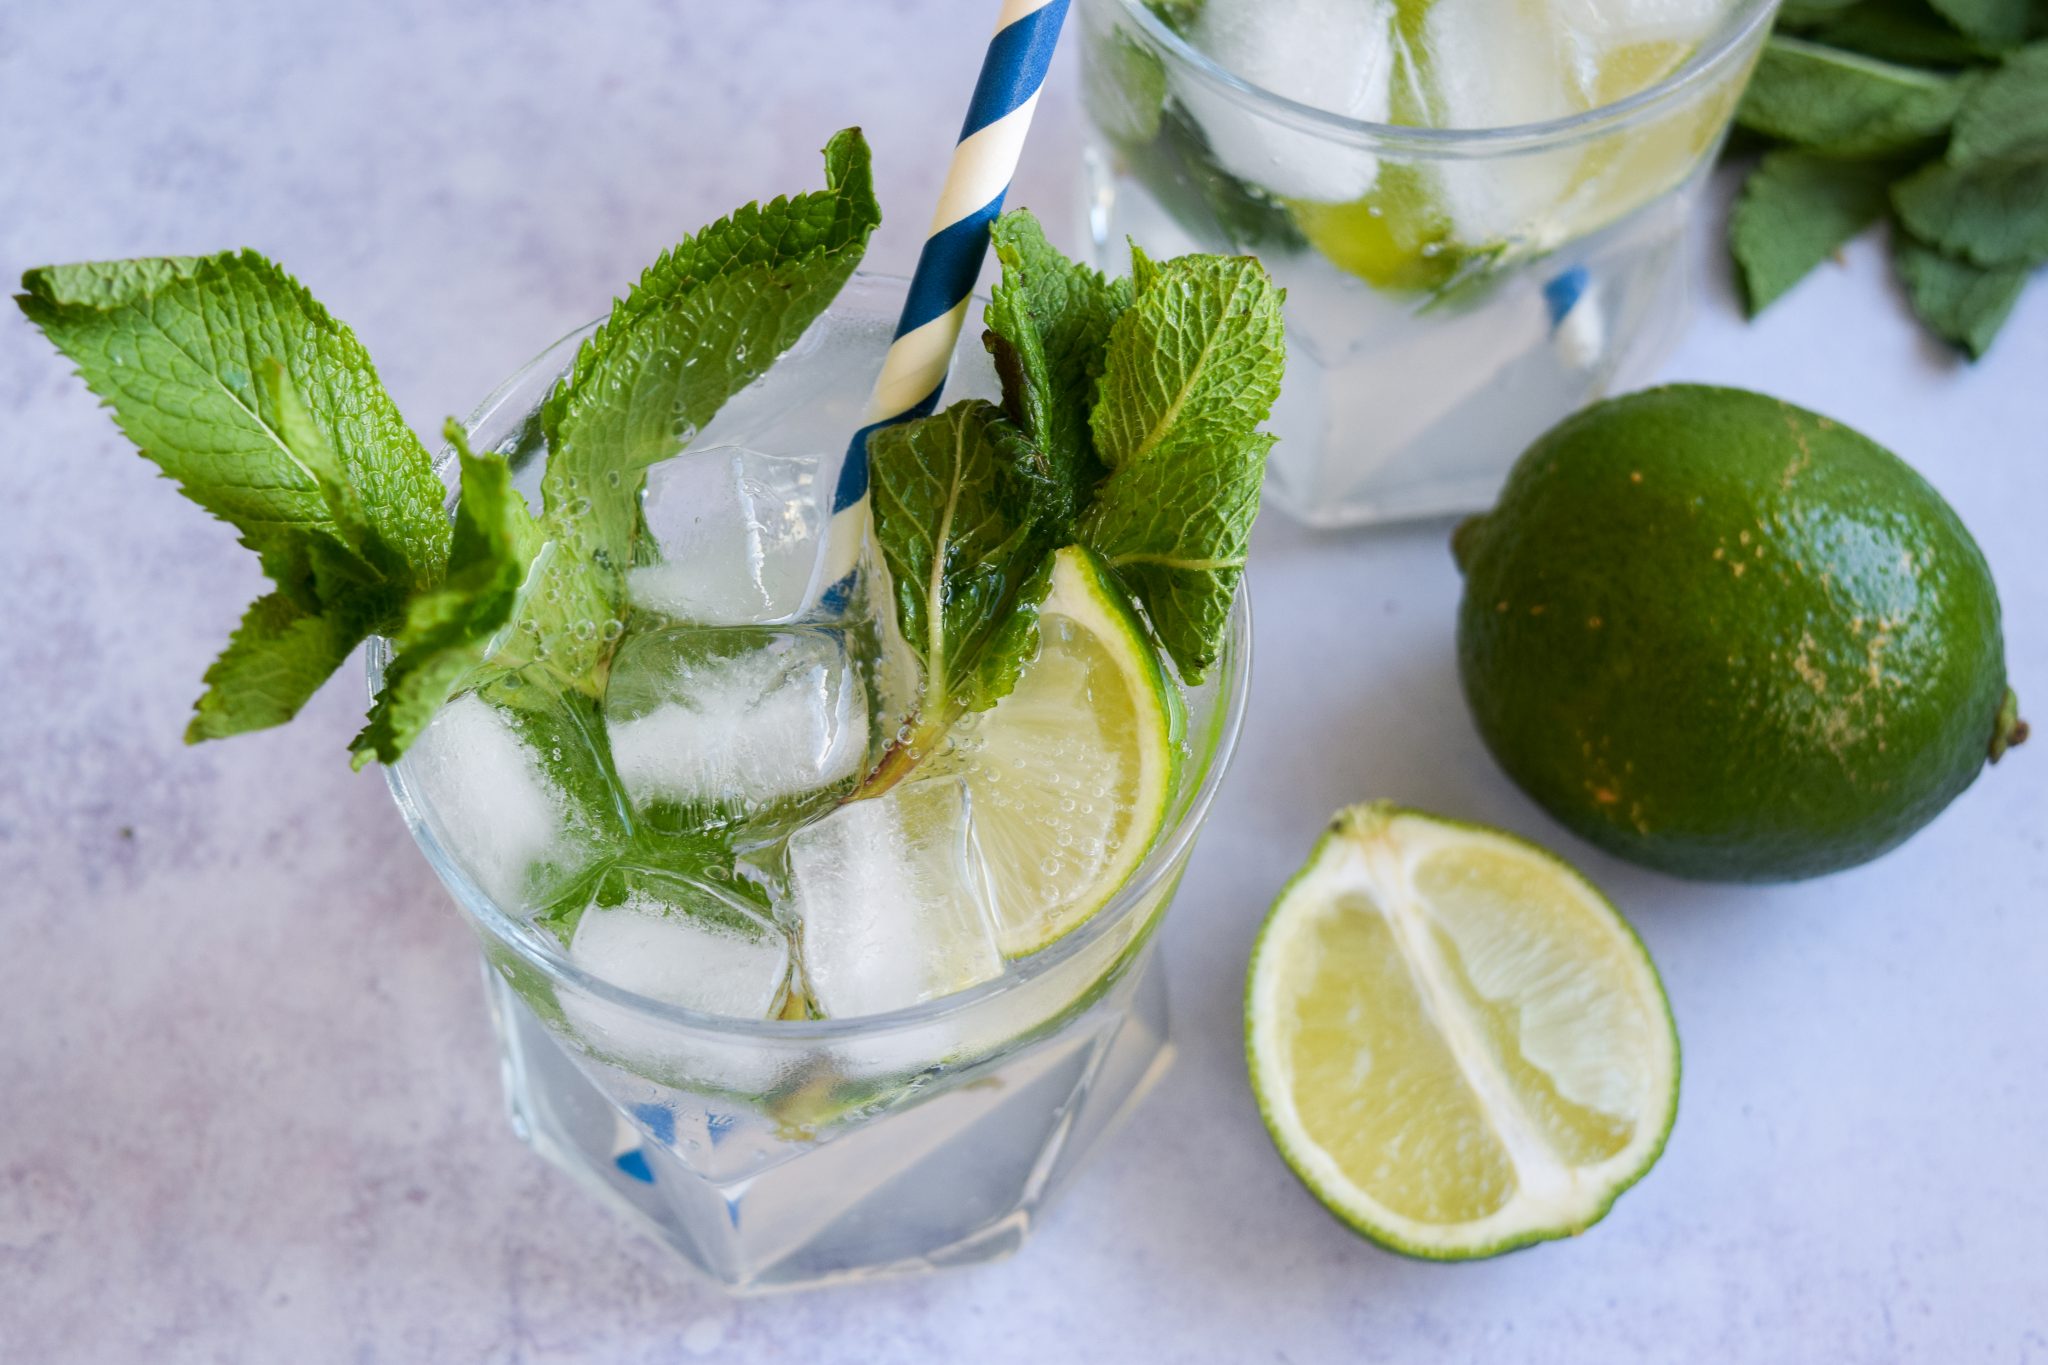 Naturally Sweetened Mint Mojito Recipe - Lexi's Clean Kitchen